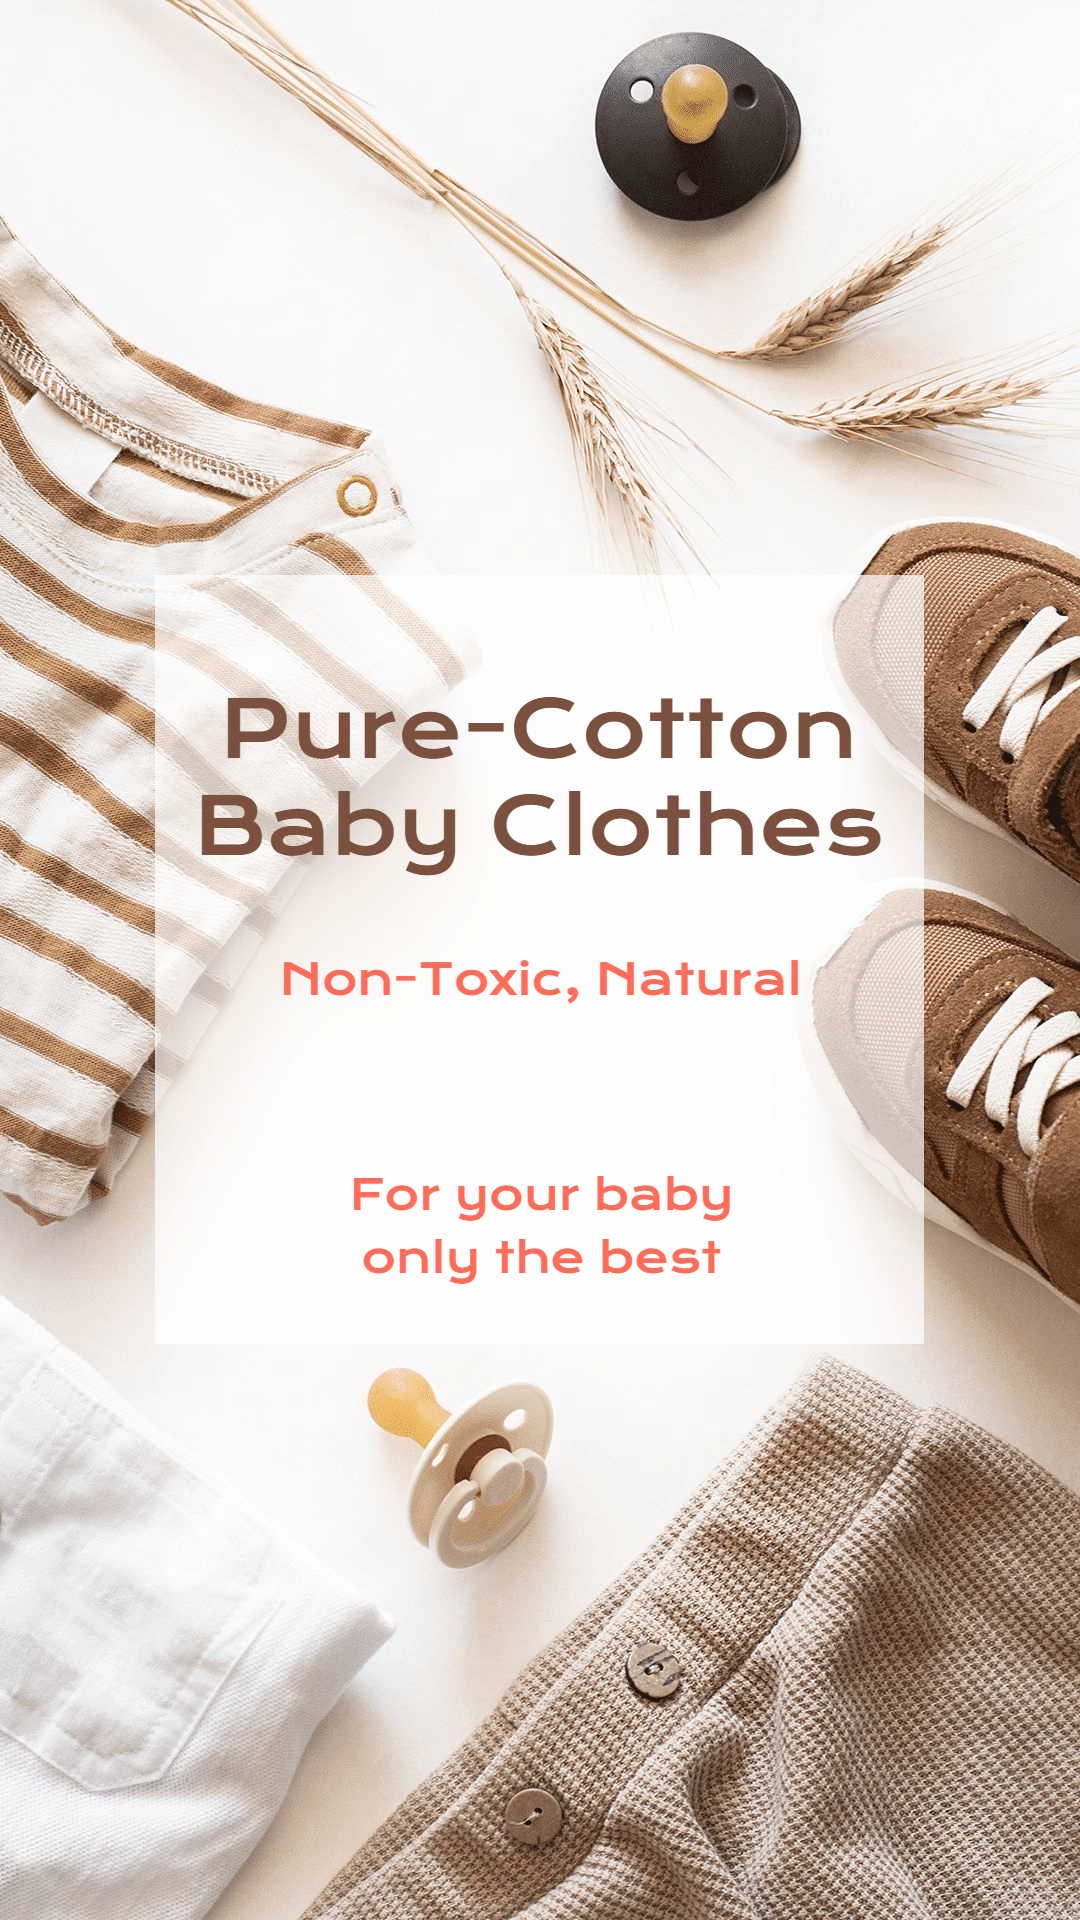 Pure-Cotton Baby Clothing Brand Ecommerce Story预览效果